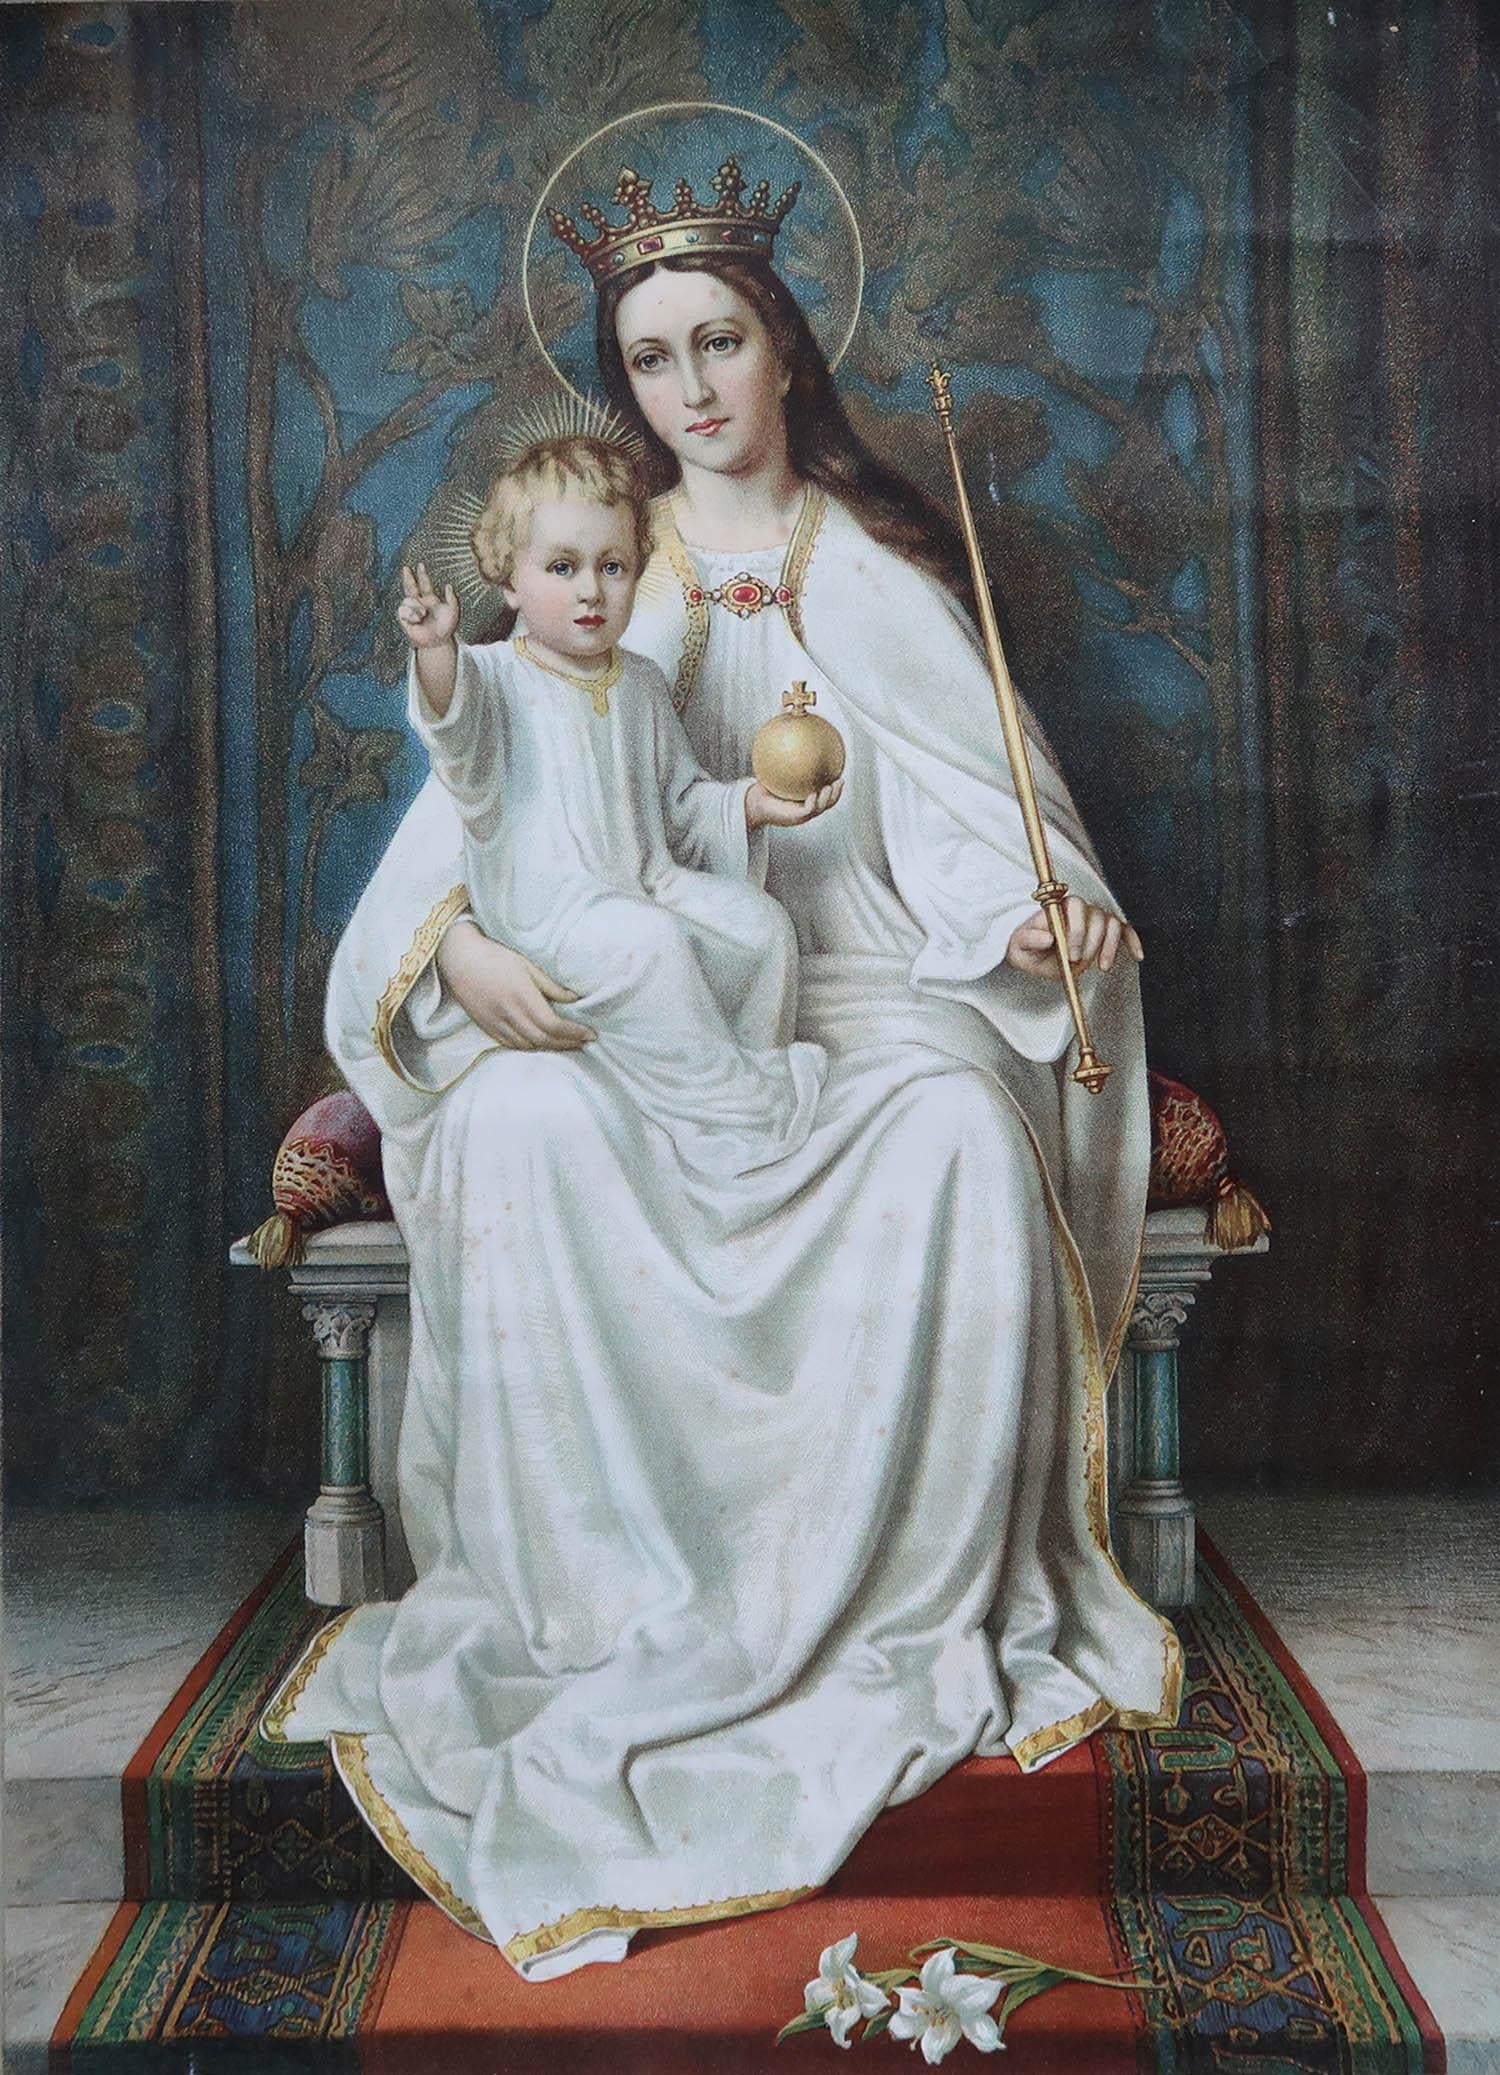 Wonderful image of The Madonna and Child
Chromolithograph
Published, circa 1900
Unframed.